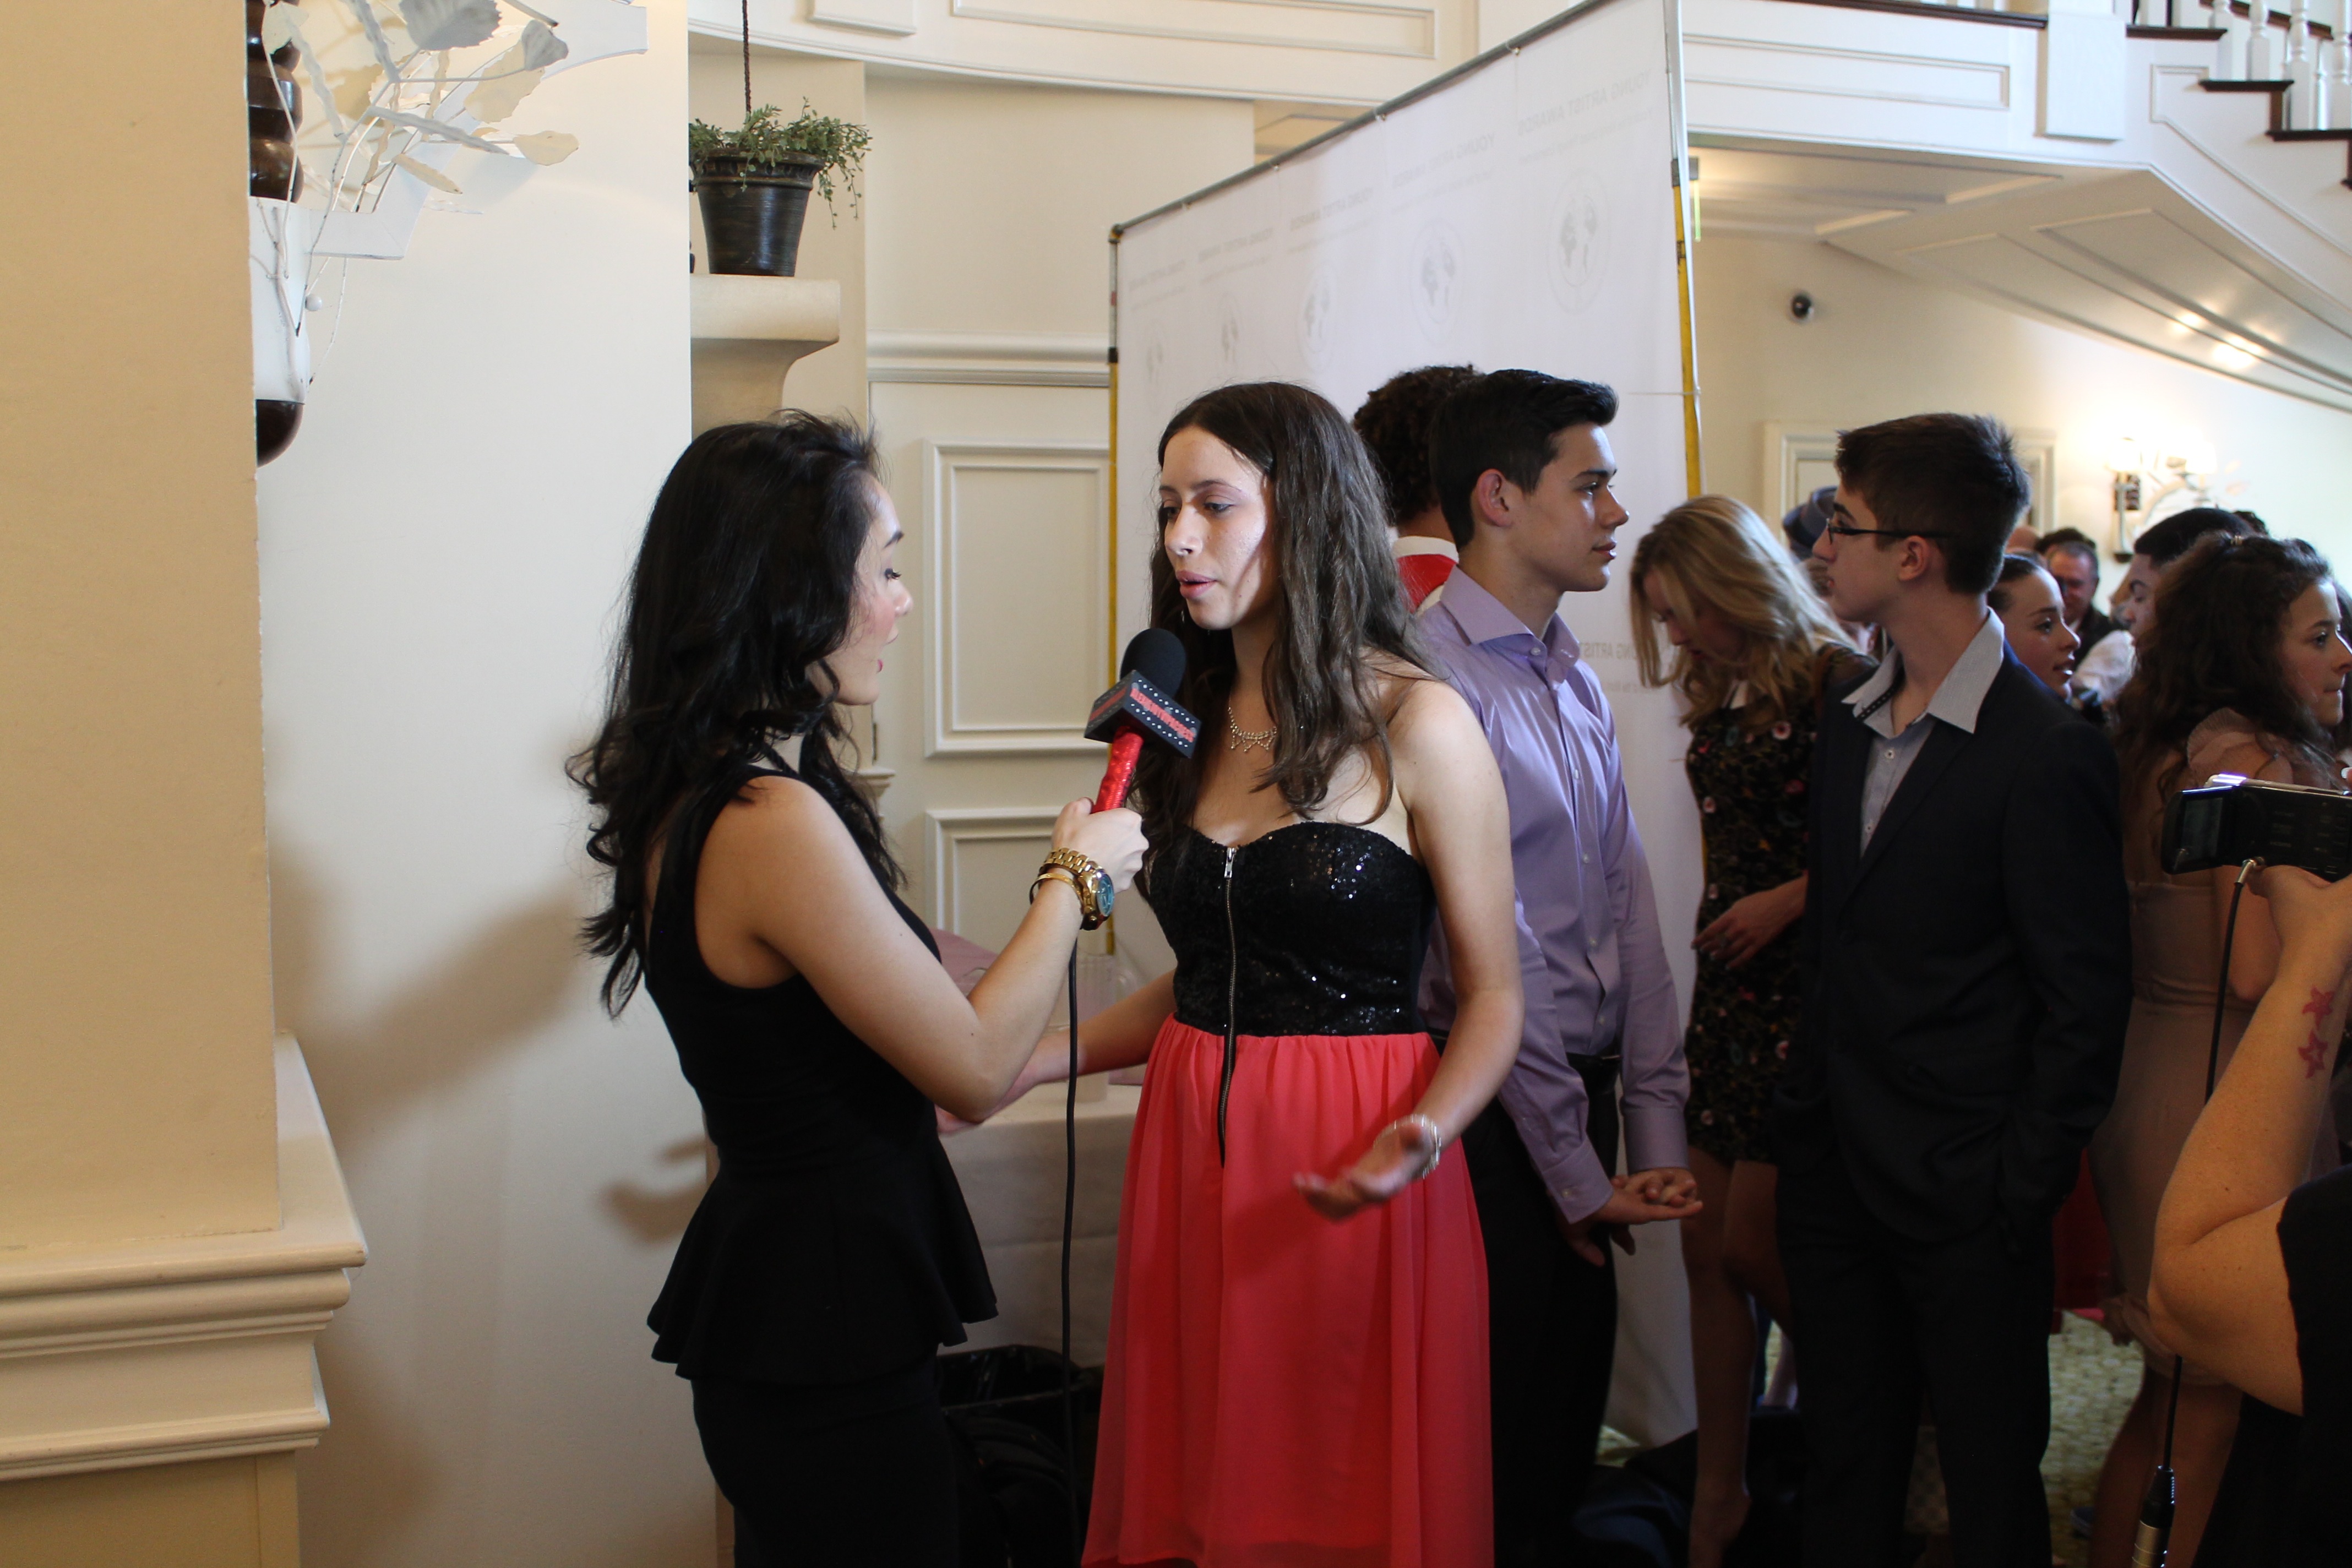 Janette Bundic being interviewed by Alexis Joy VIP Access at the 2015 Young Artist Awards in LA